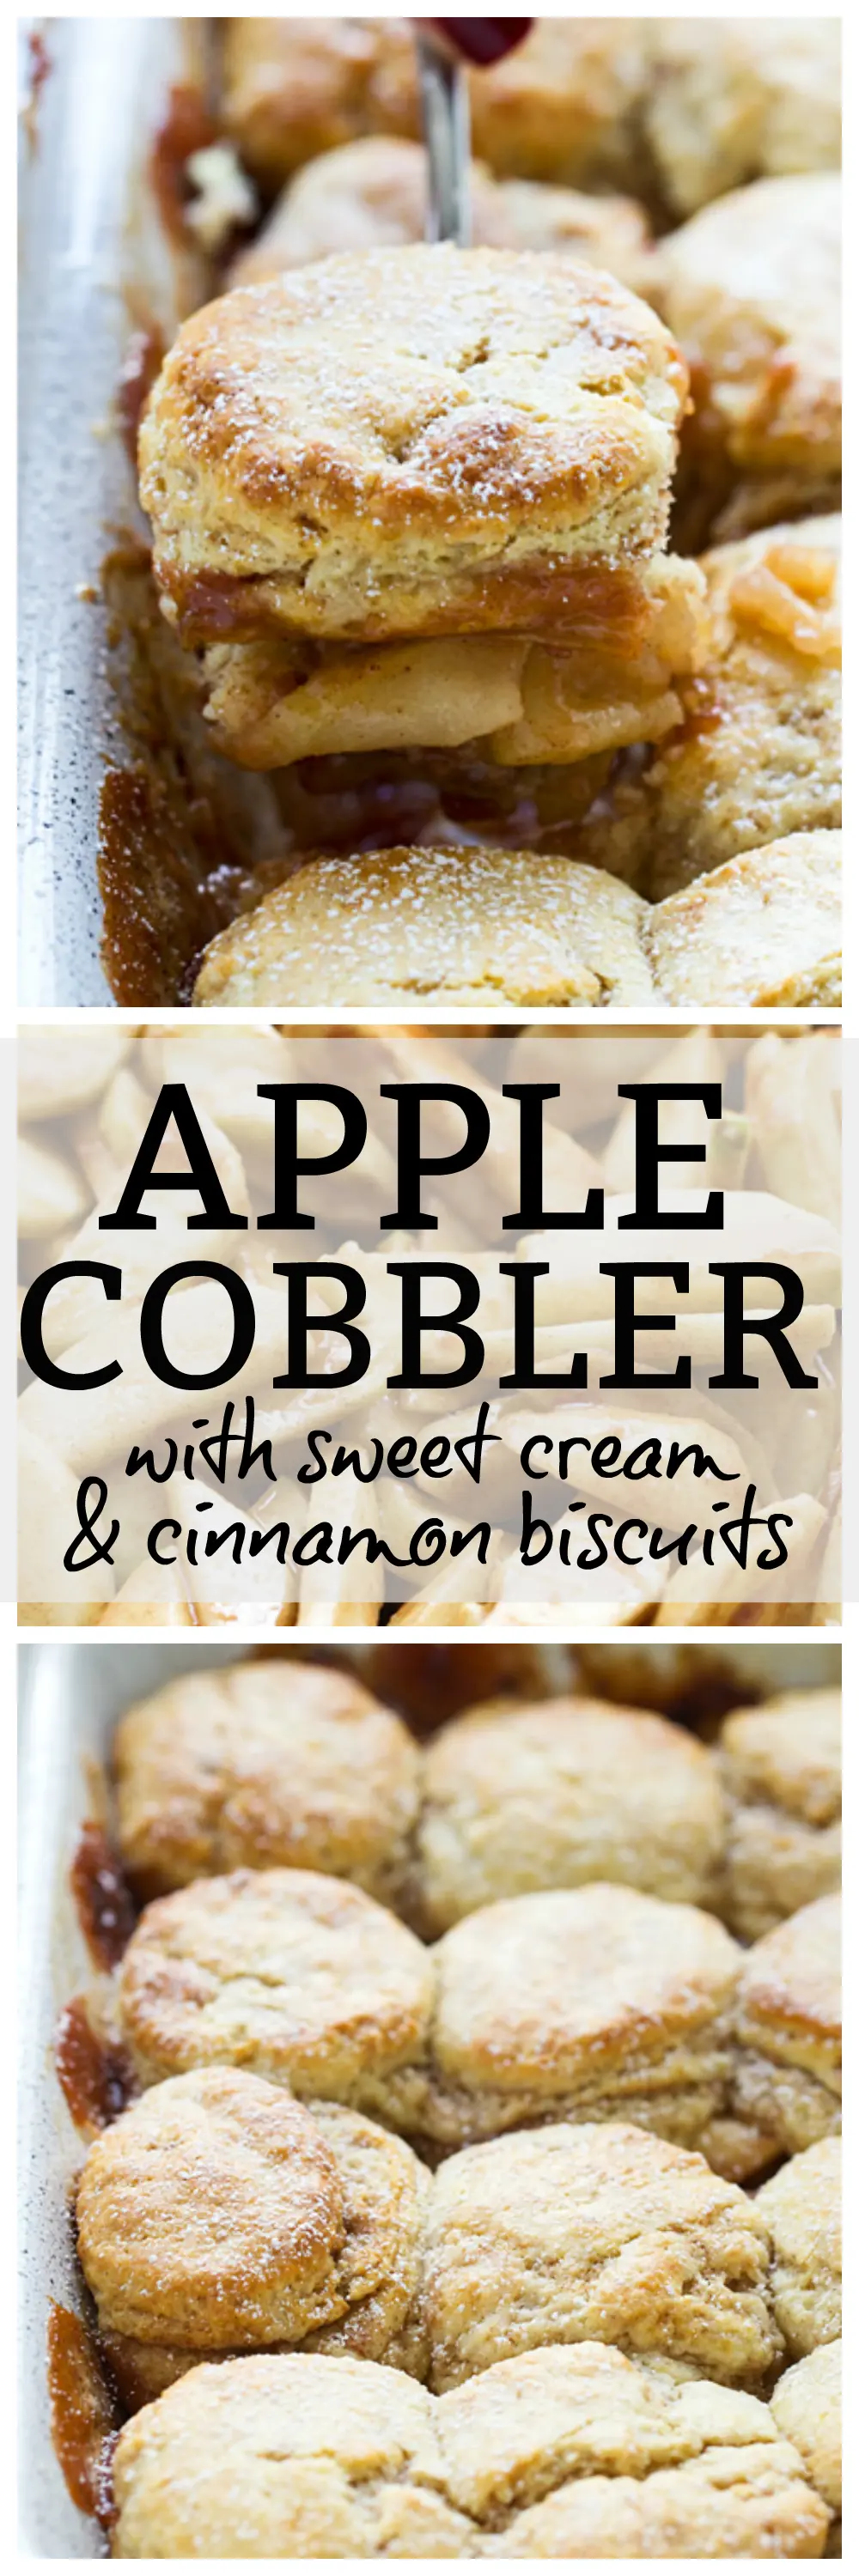 Easy Apple Cobbler with Sweet Cream and Cinnamon Biscuits